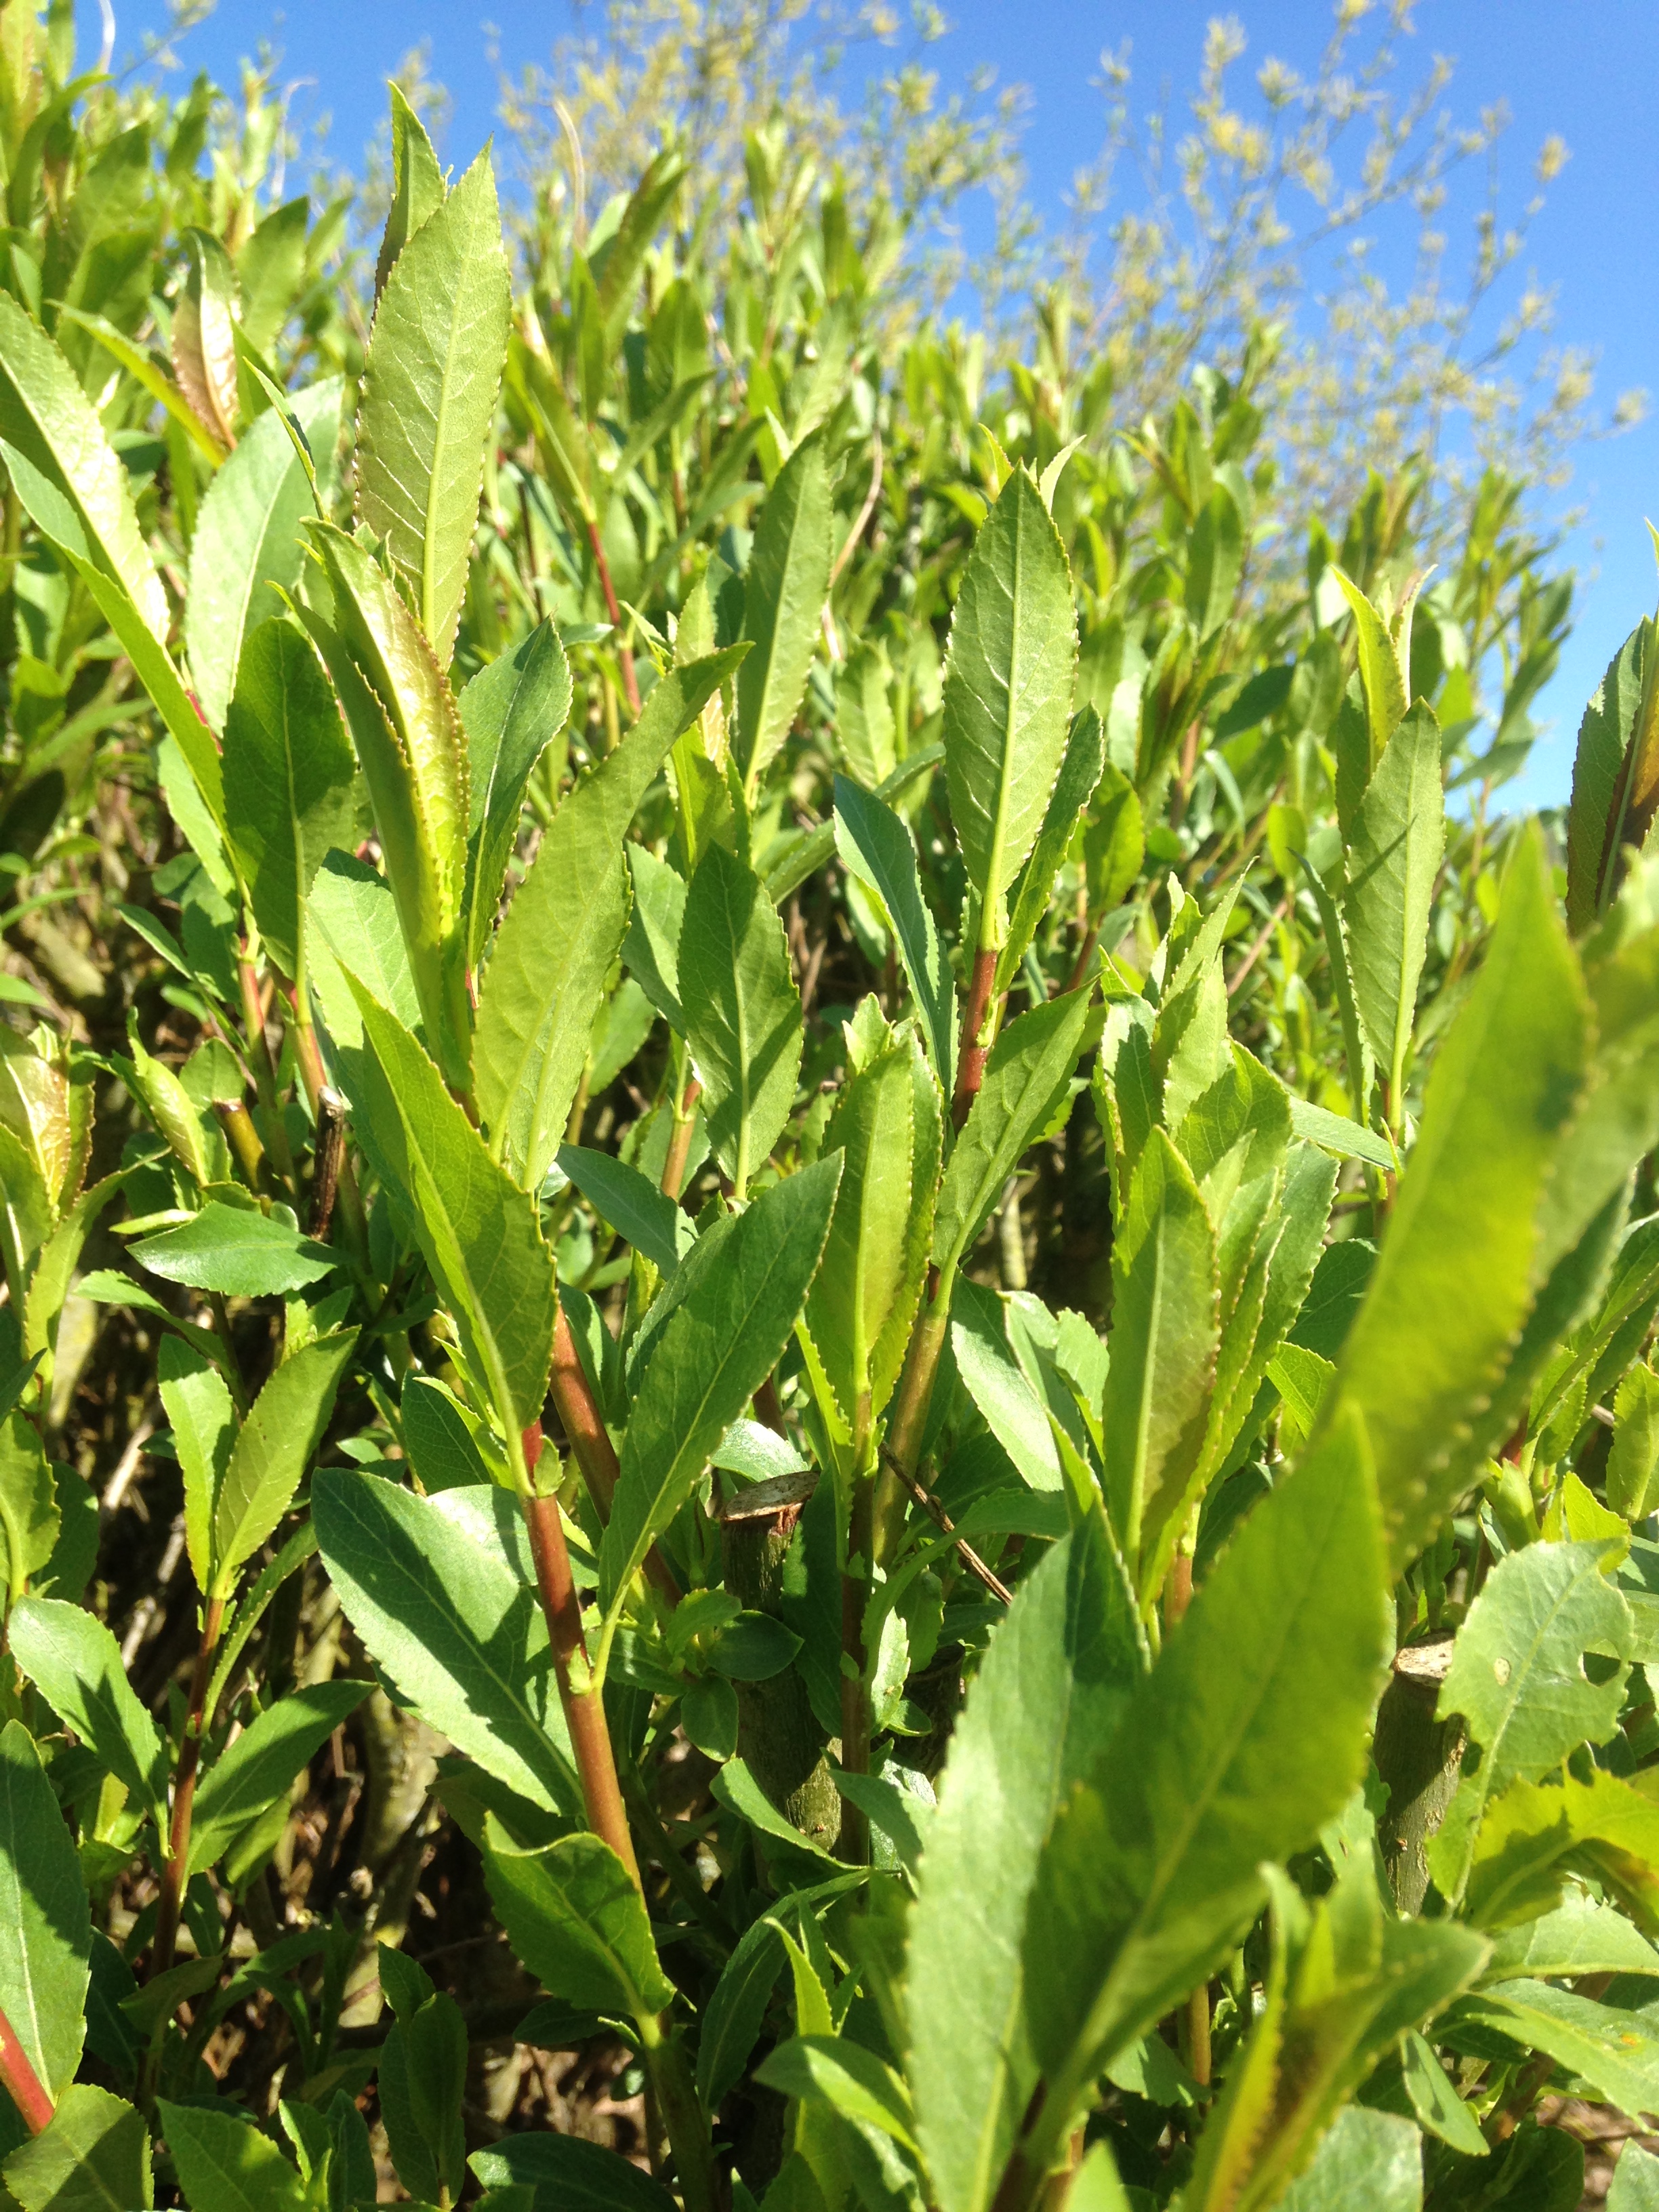 New Spring growth Salix Triandra “Petite Grisette” W780. Buy short willow cuttings